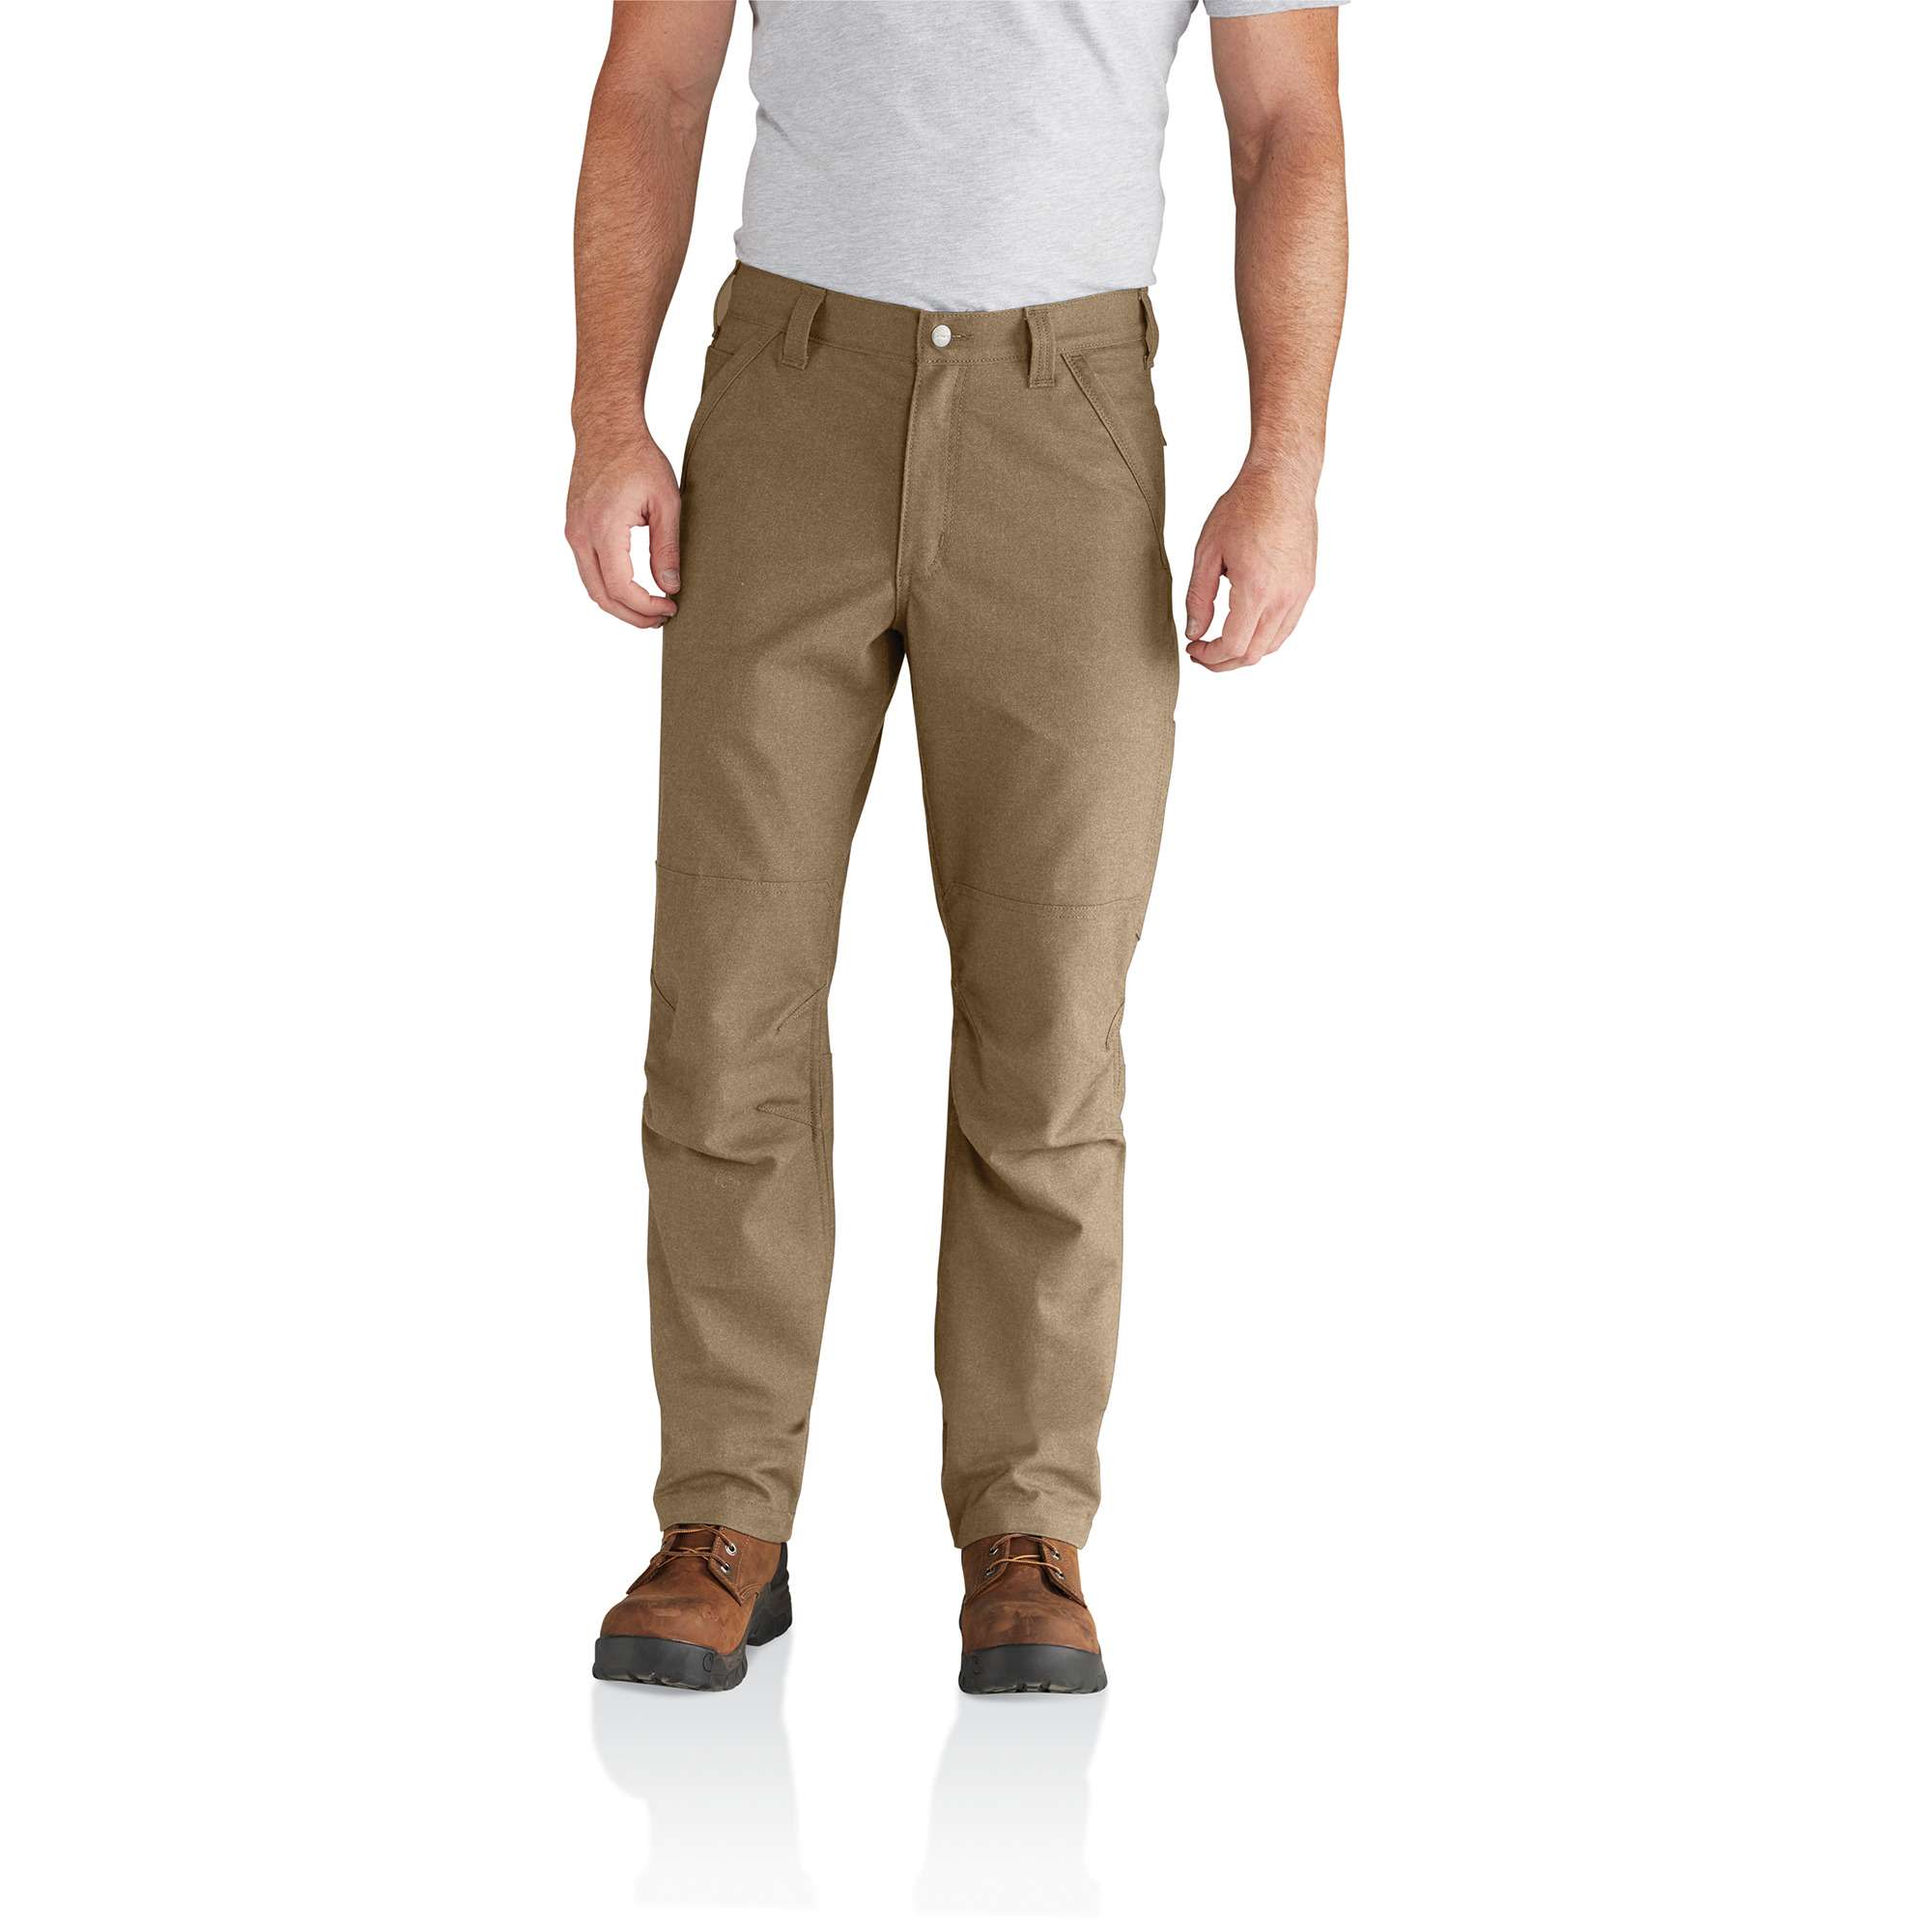 Full Swing® Water-Repellent Cryder Work Pant 2.0 | Carhartt Reworked